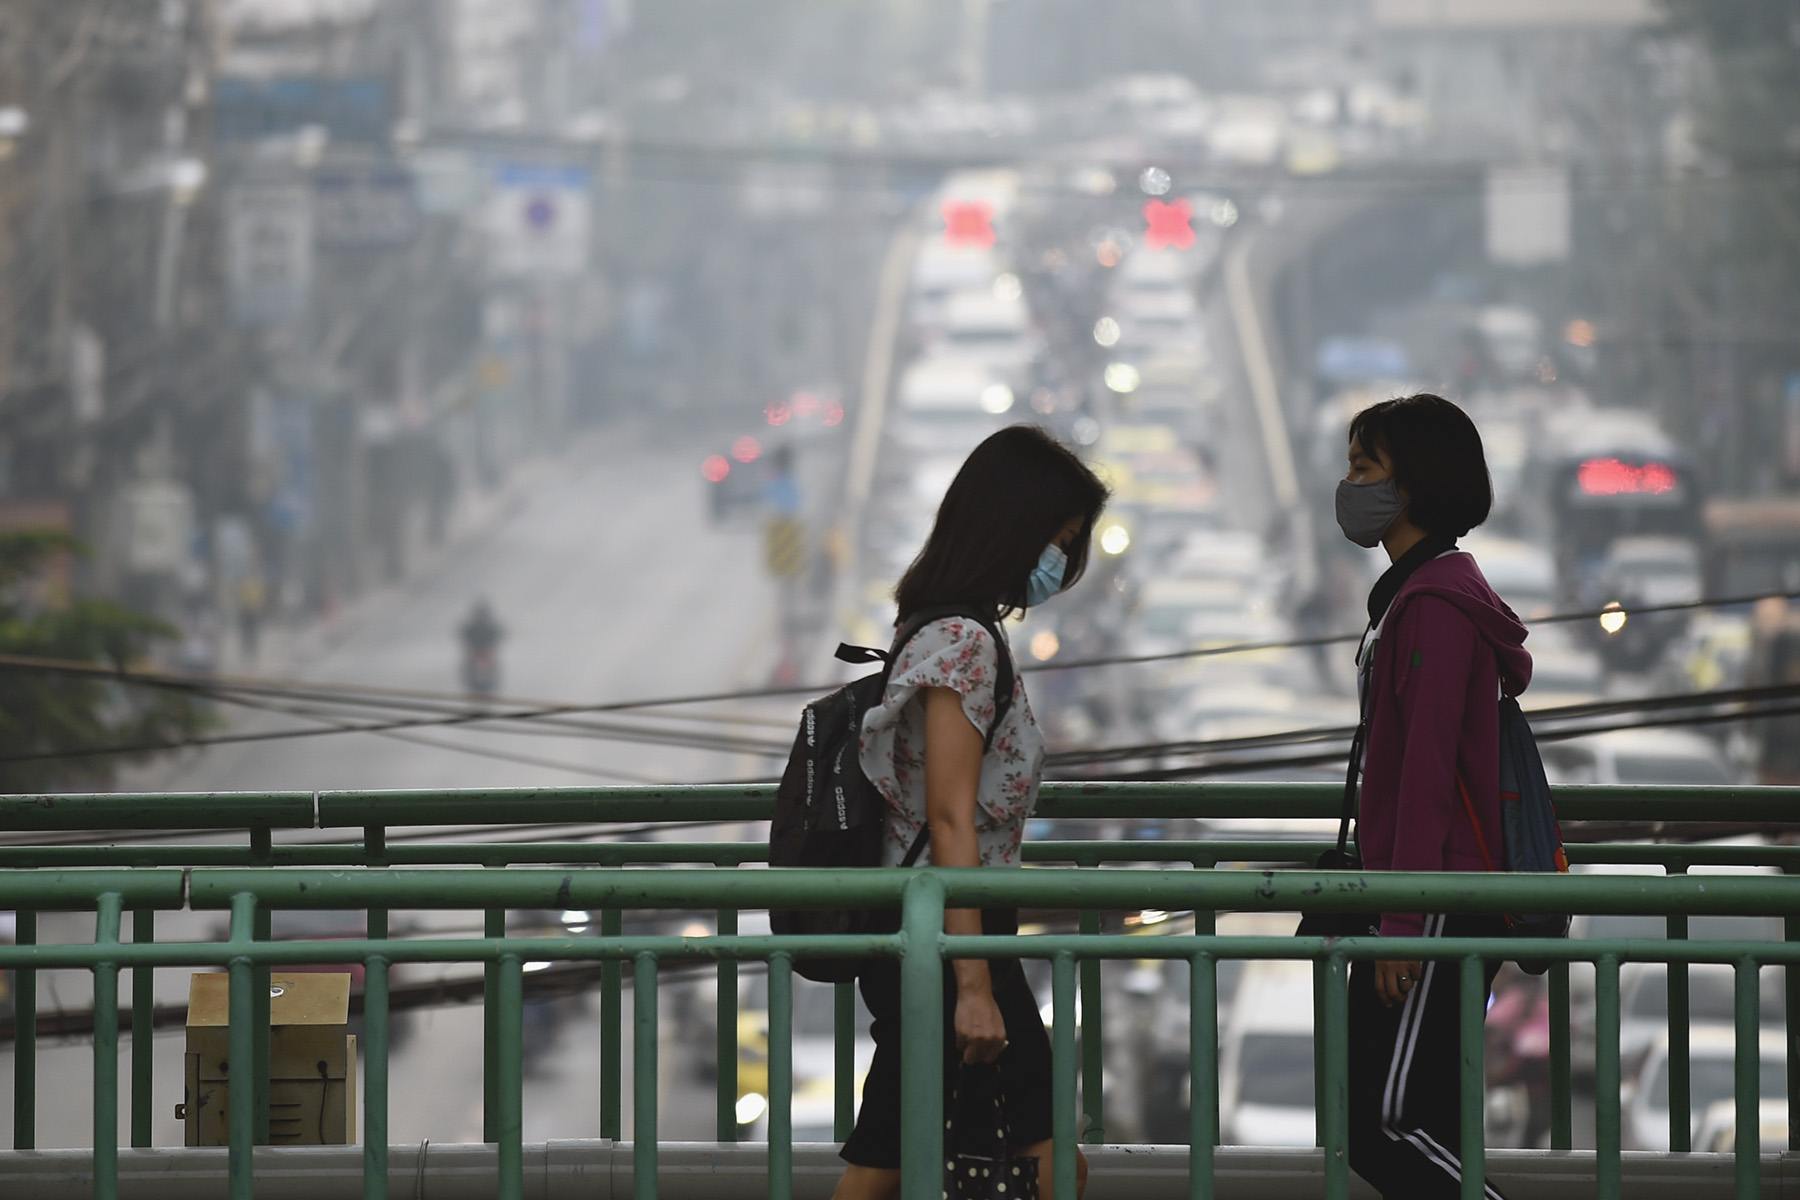 Two pedestrians wearing face masks on a smoggy day in Bangkok, Thailand.